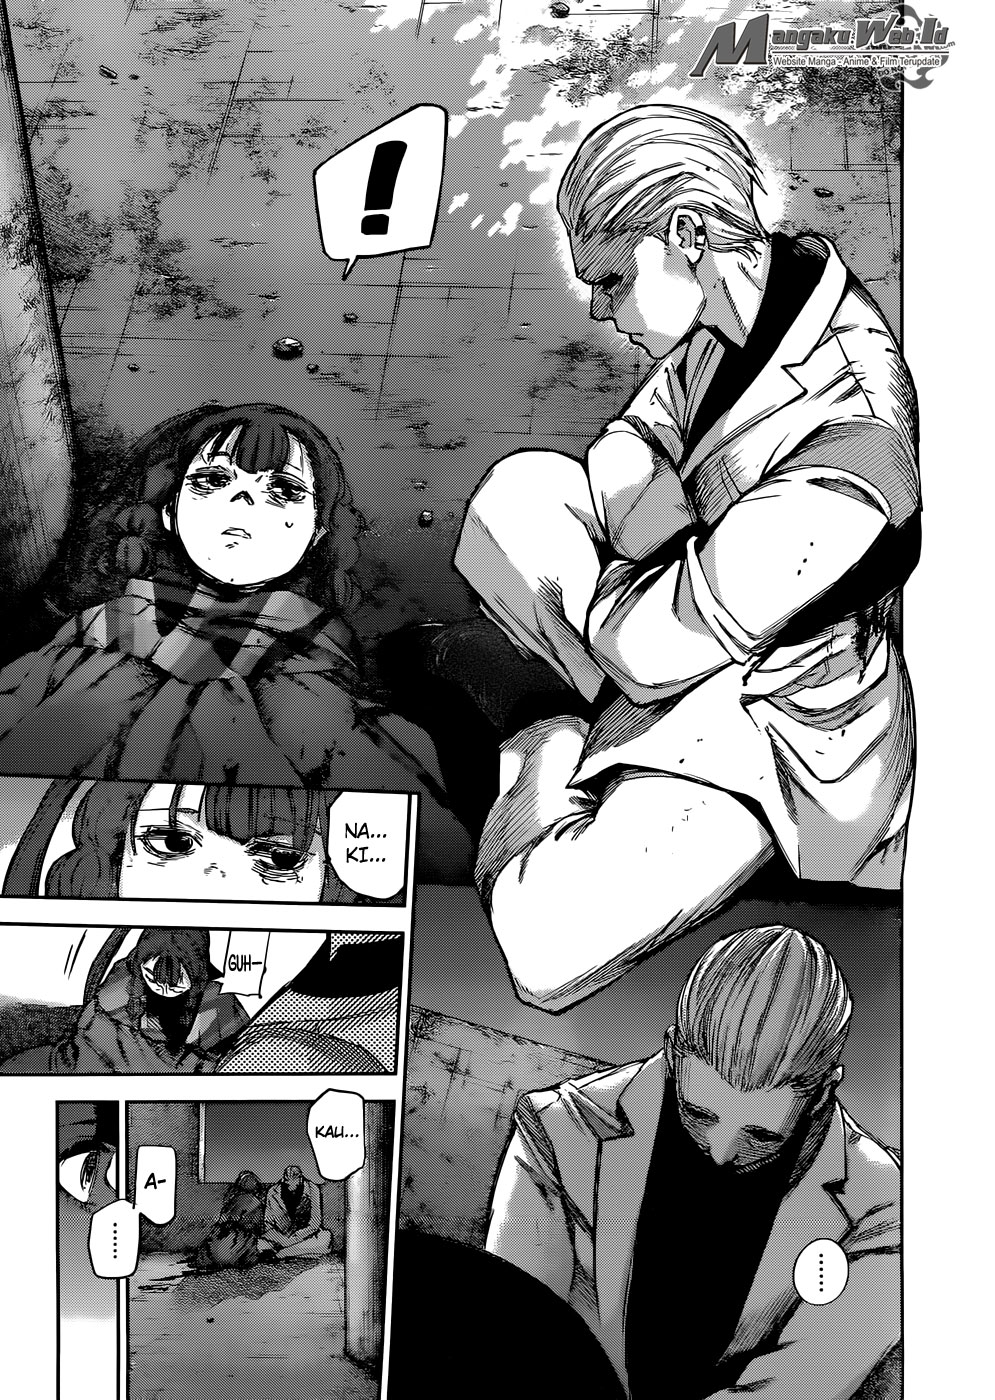 Tokyo Ghoul:re Chapter 92